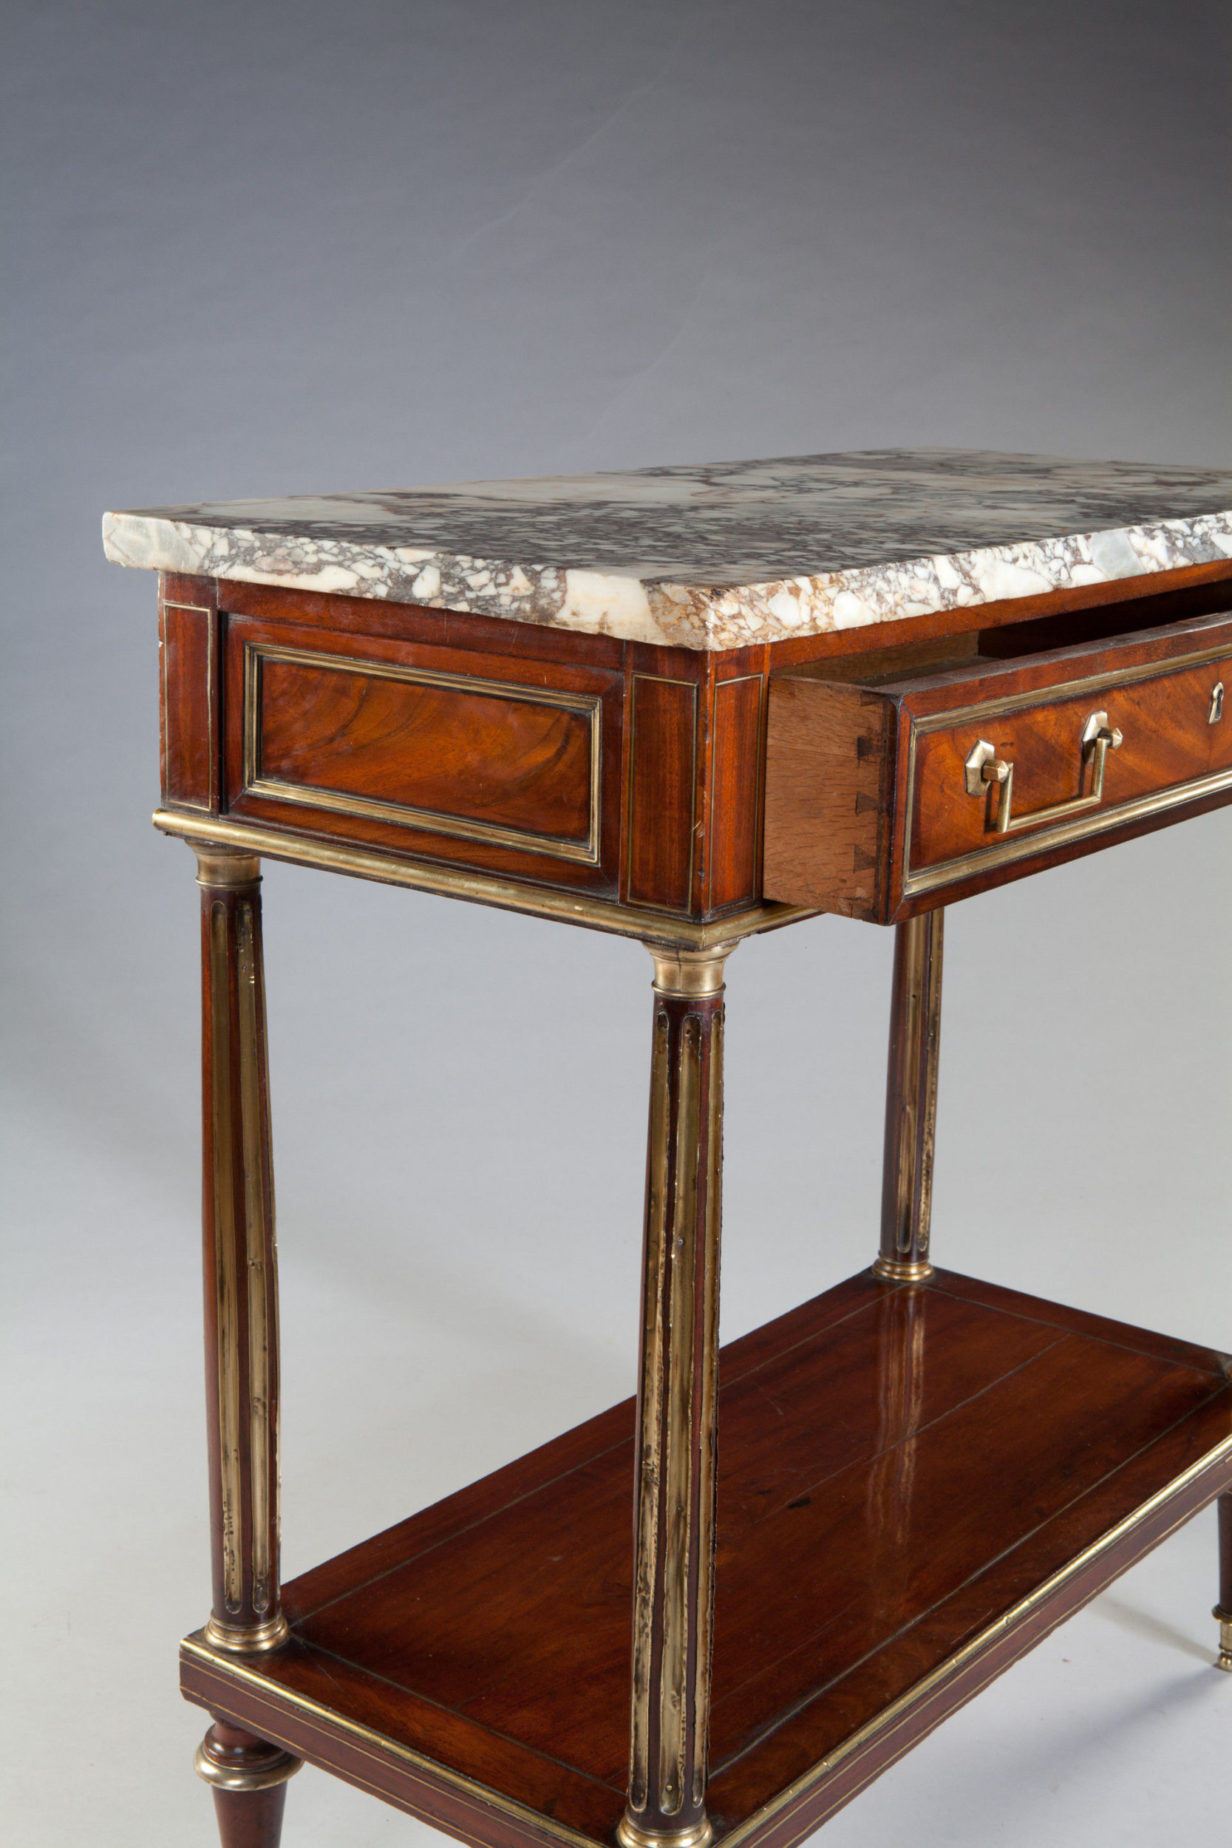 A late 18th century directoire period console table with breche violette marble top